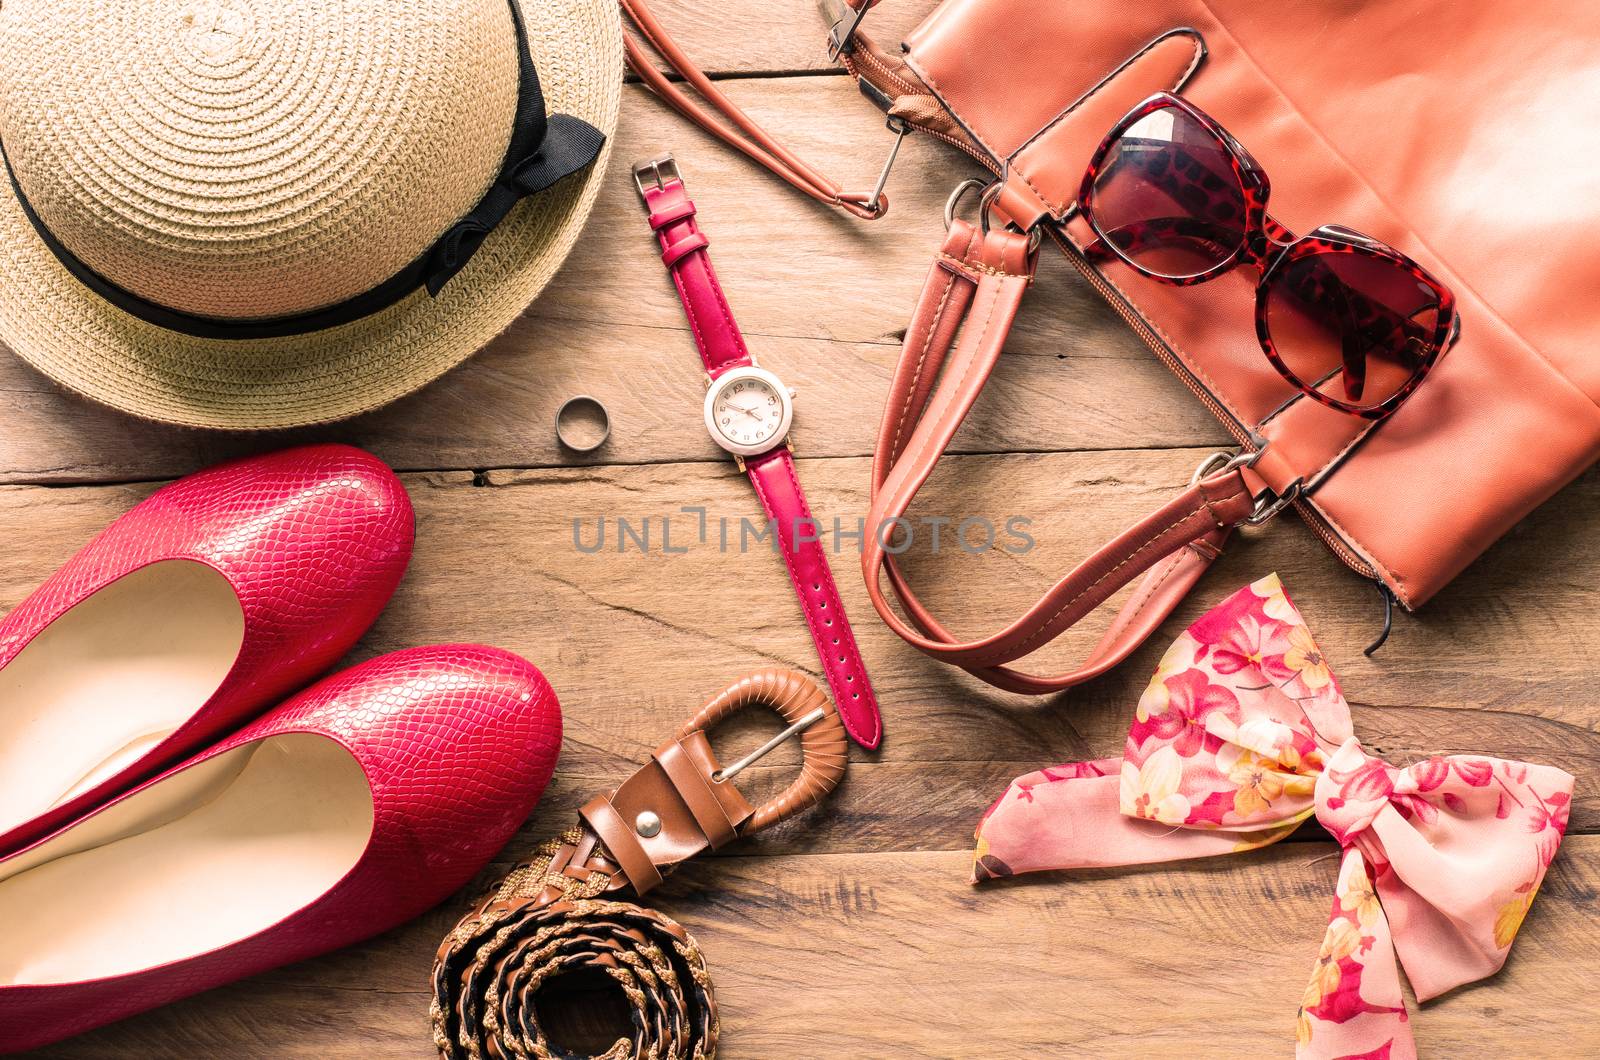 Travel accessories on wooden floor ready for travel by photobyphotoboy